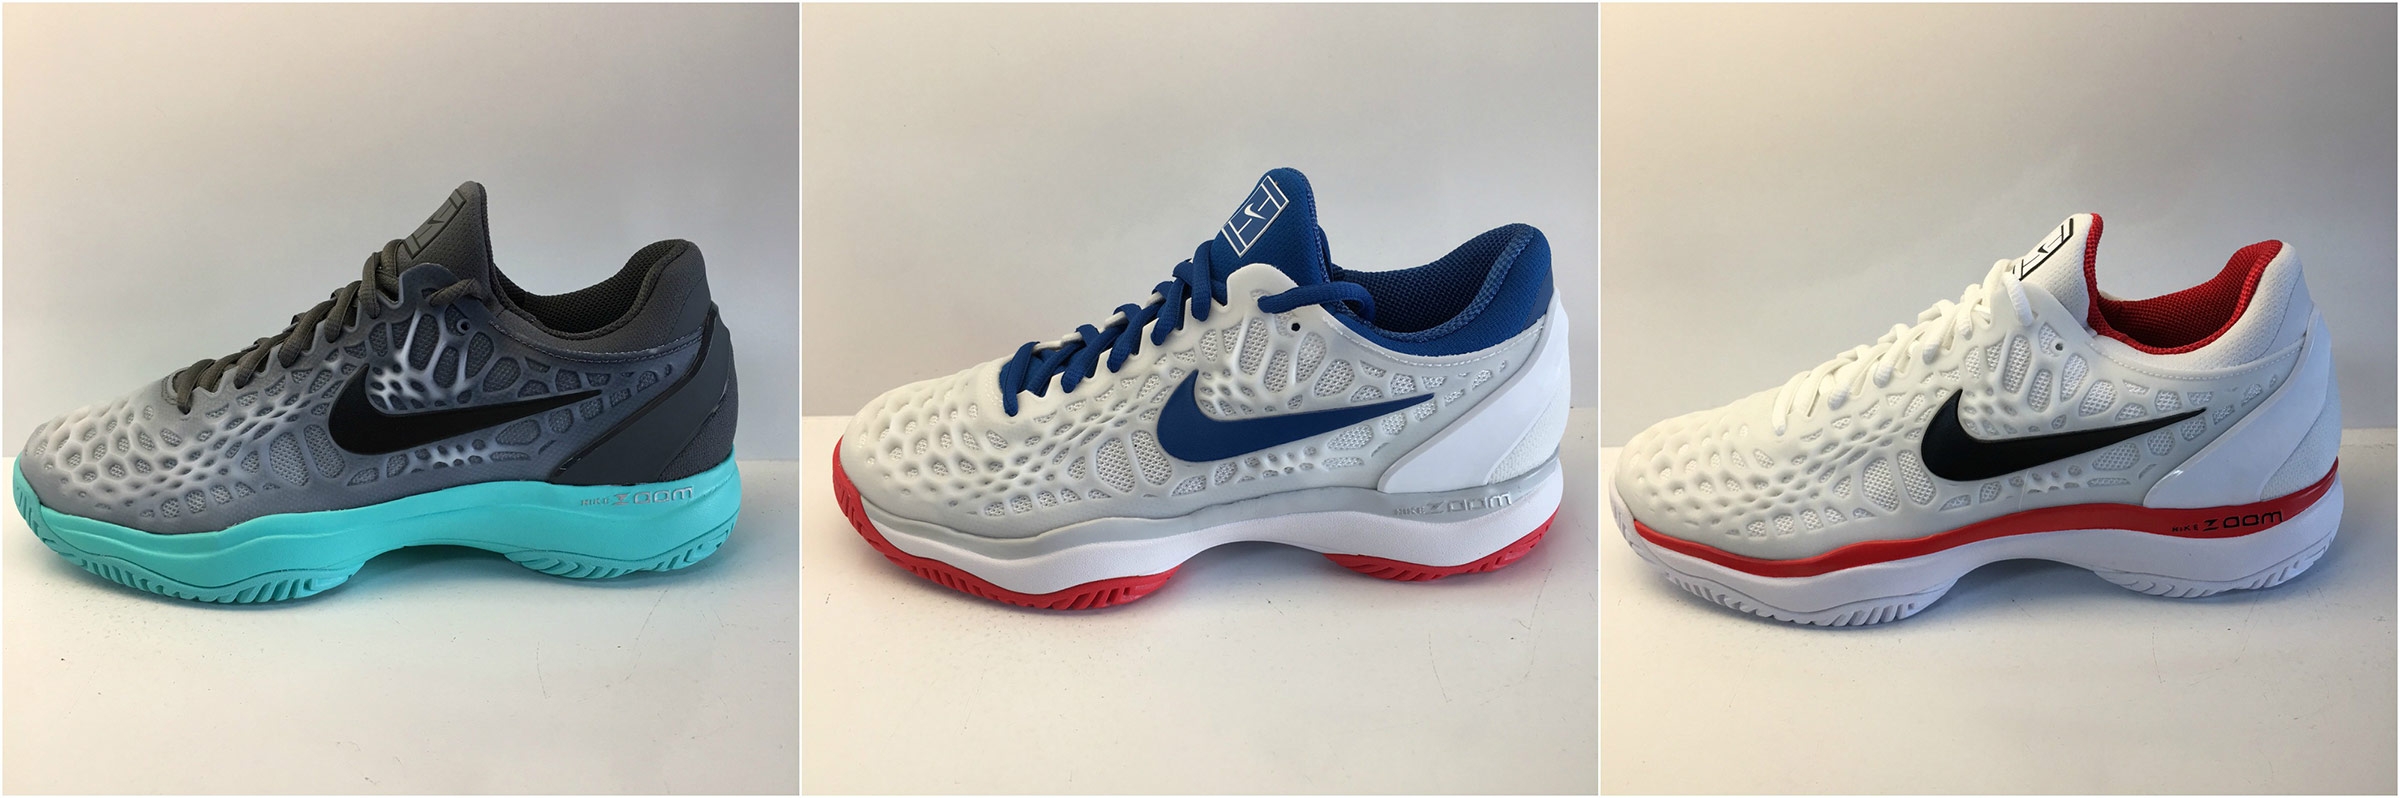 Product Spotlight: Nike Zoom Cage 3 – First Serve Tennis